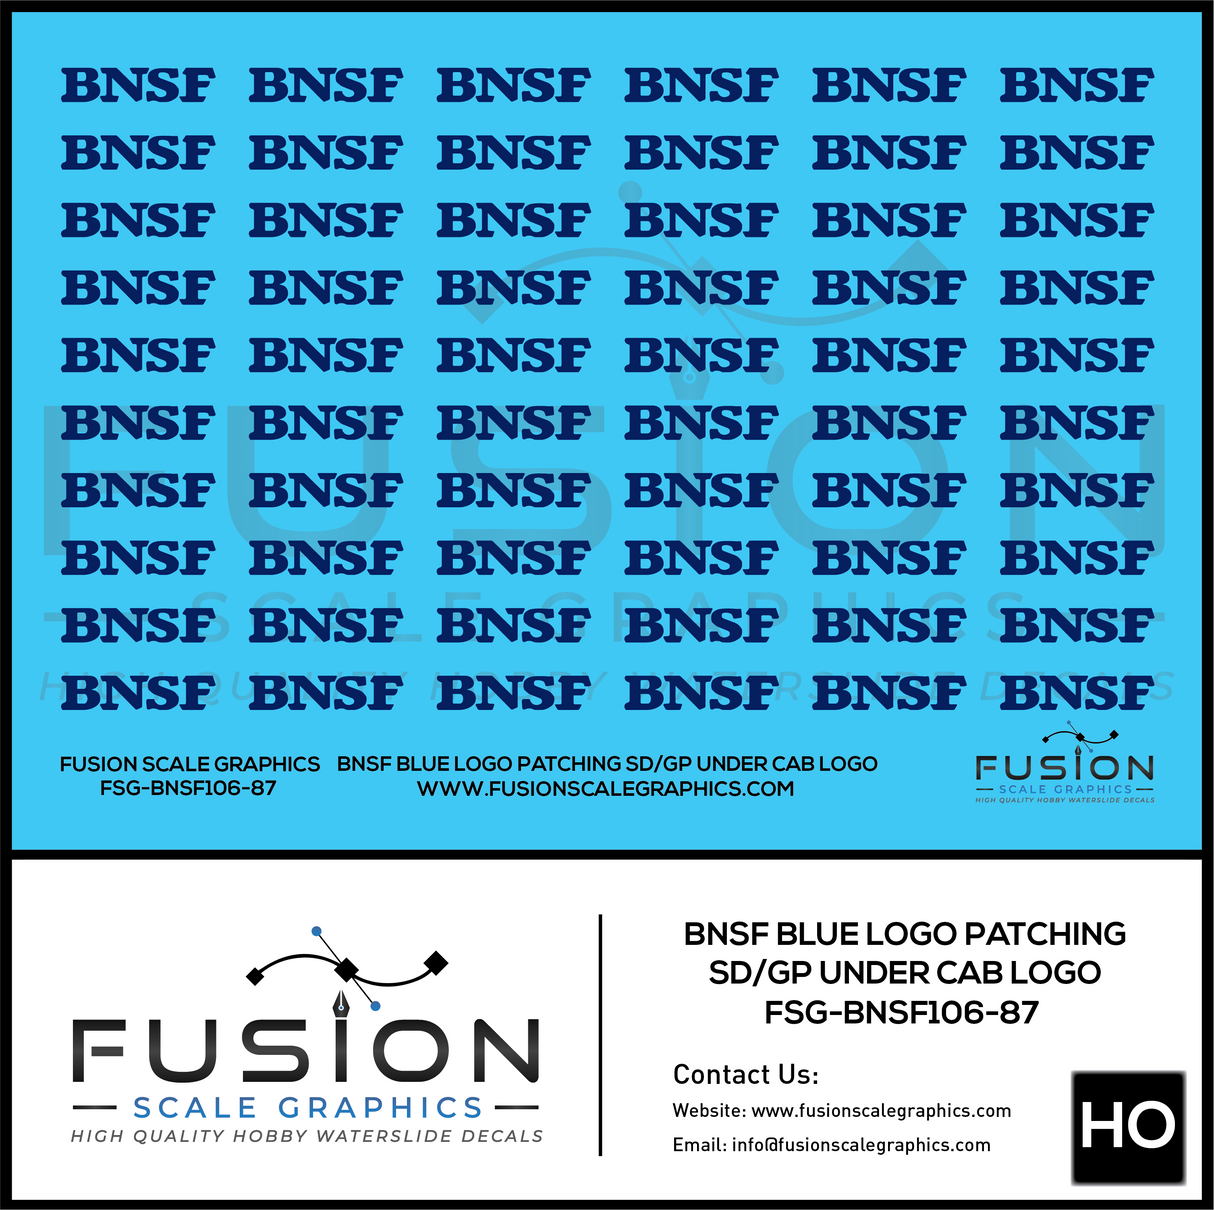 HO Scale BNSF Blue Logo Locomotive Patching Decal Set